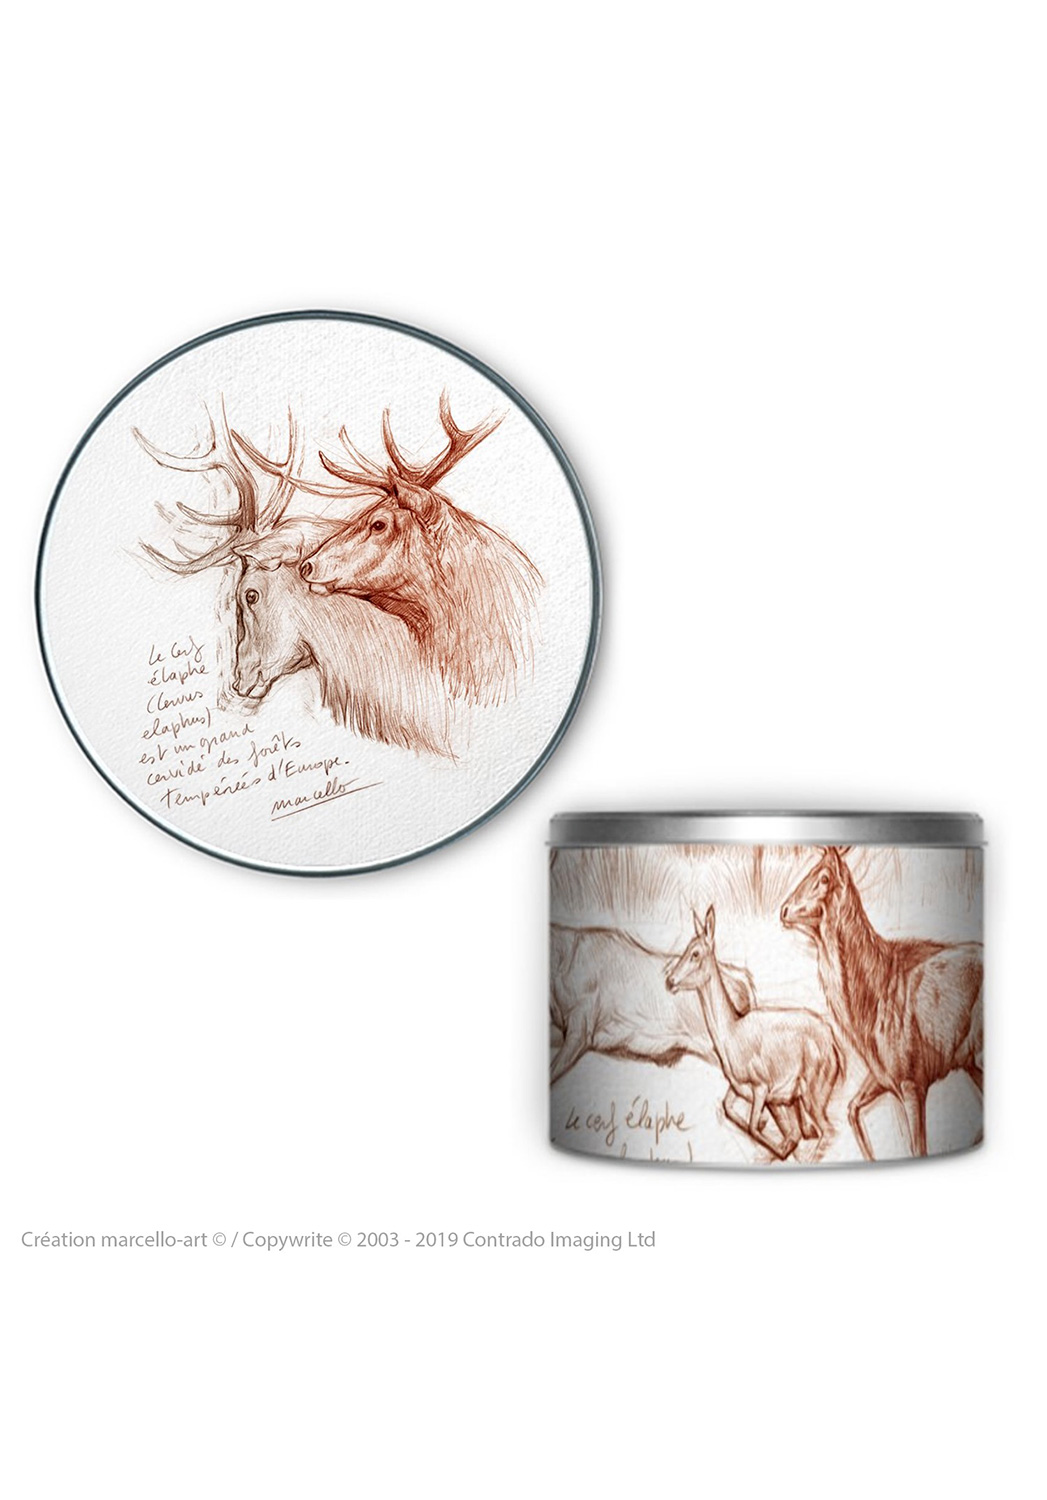 Marcello-art: Decoration accessoiries Round biscuit box 52 red deer